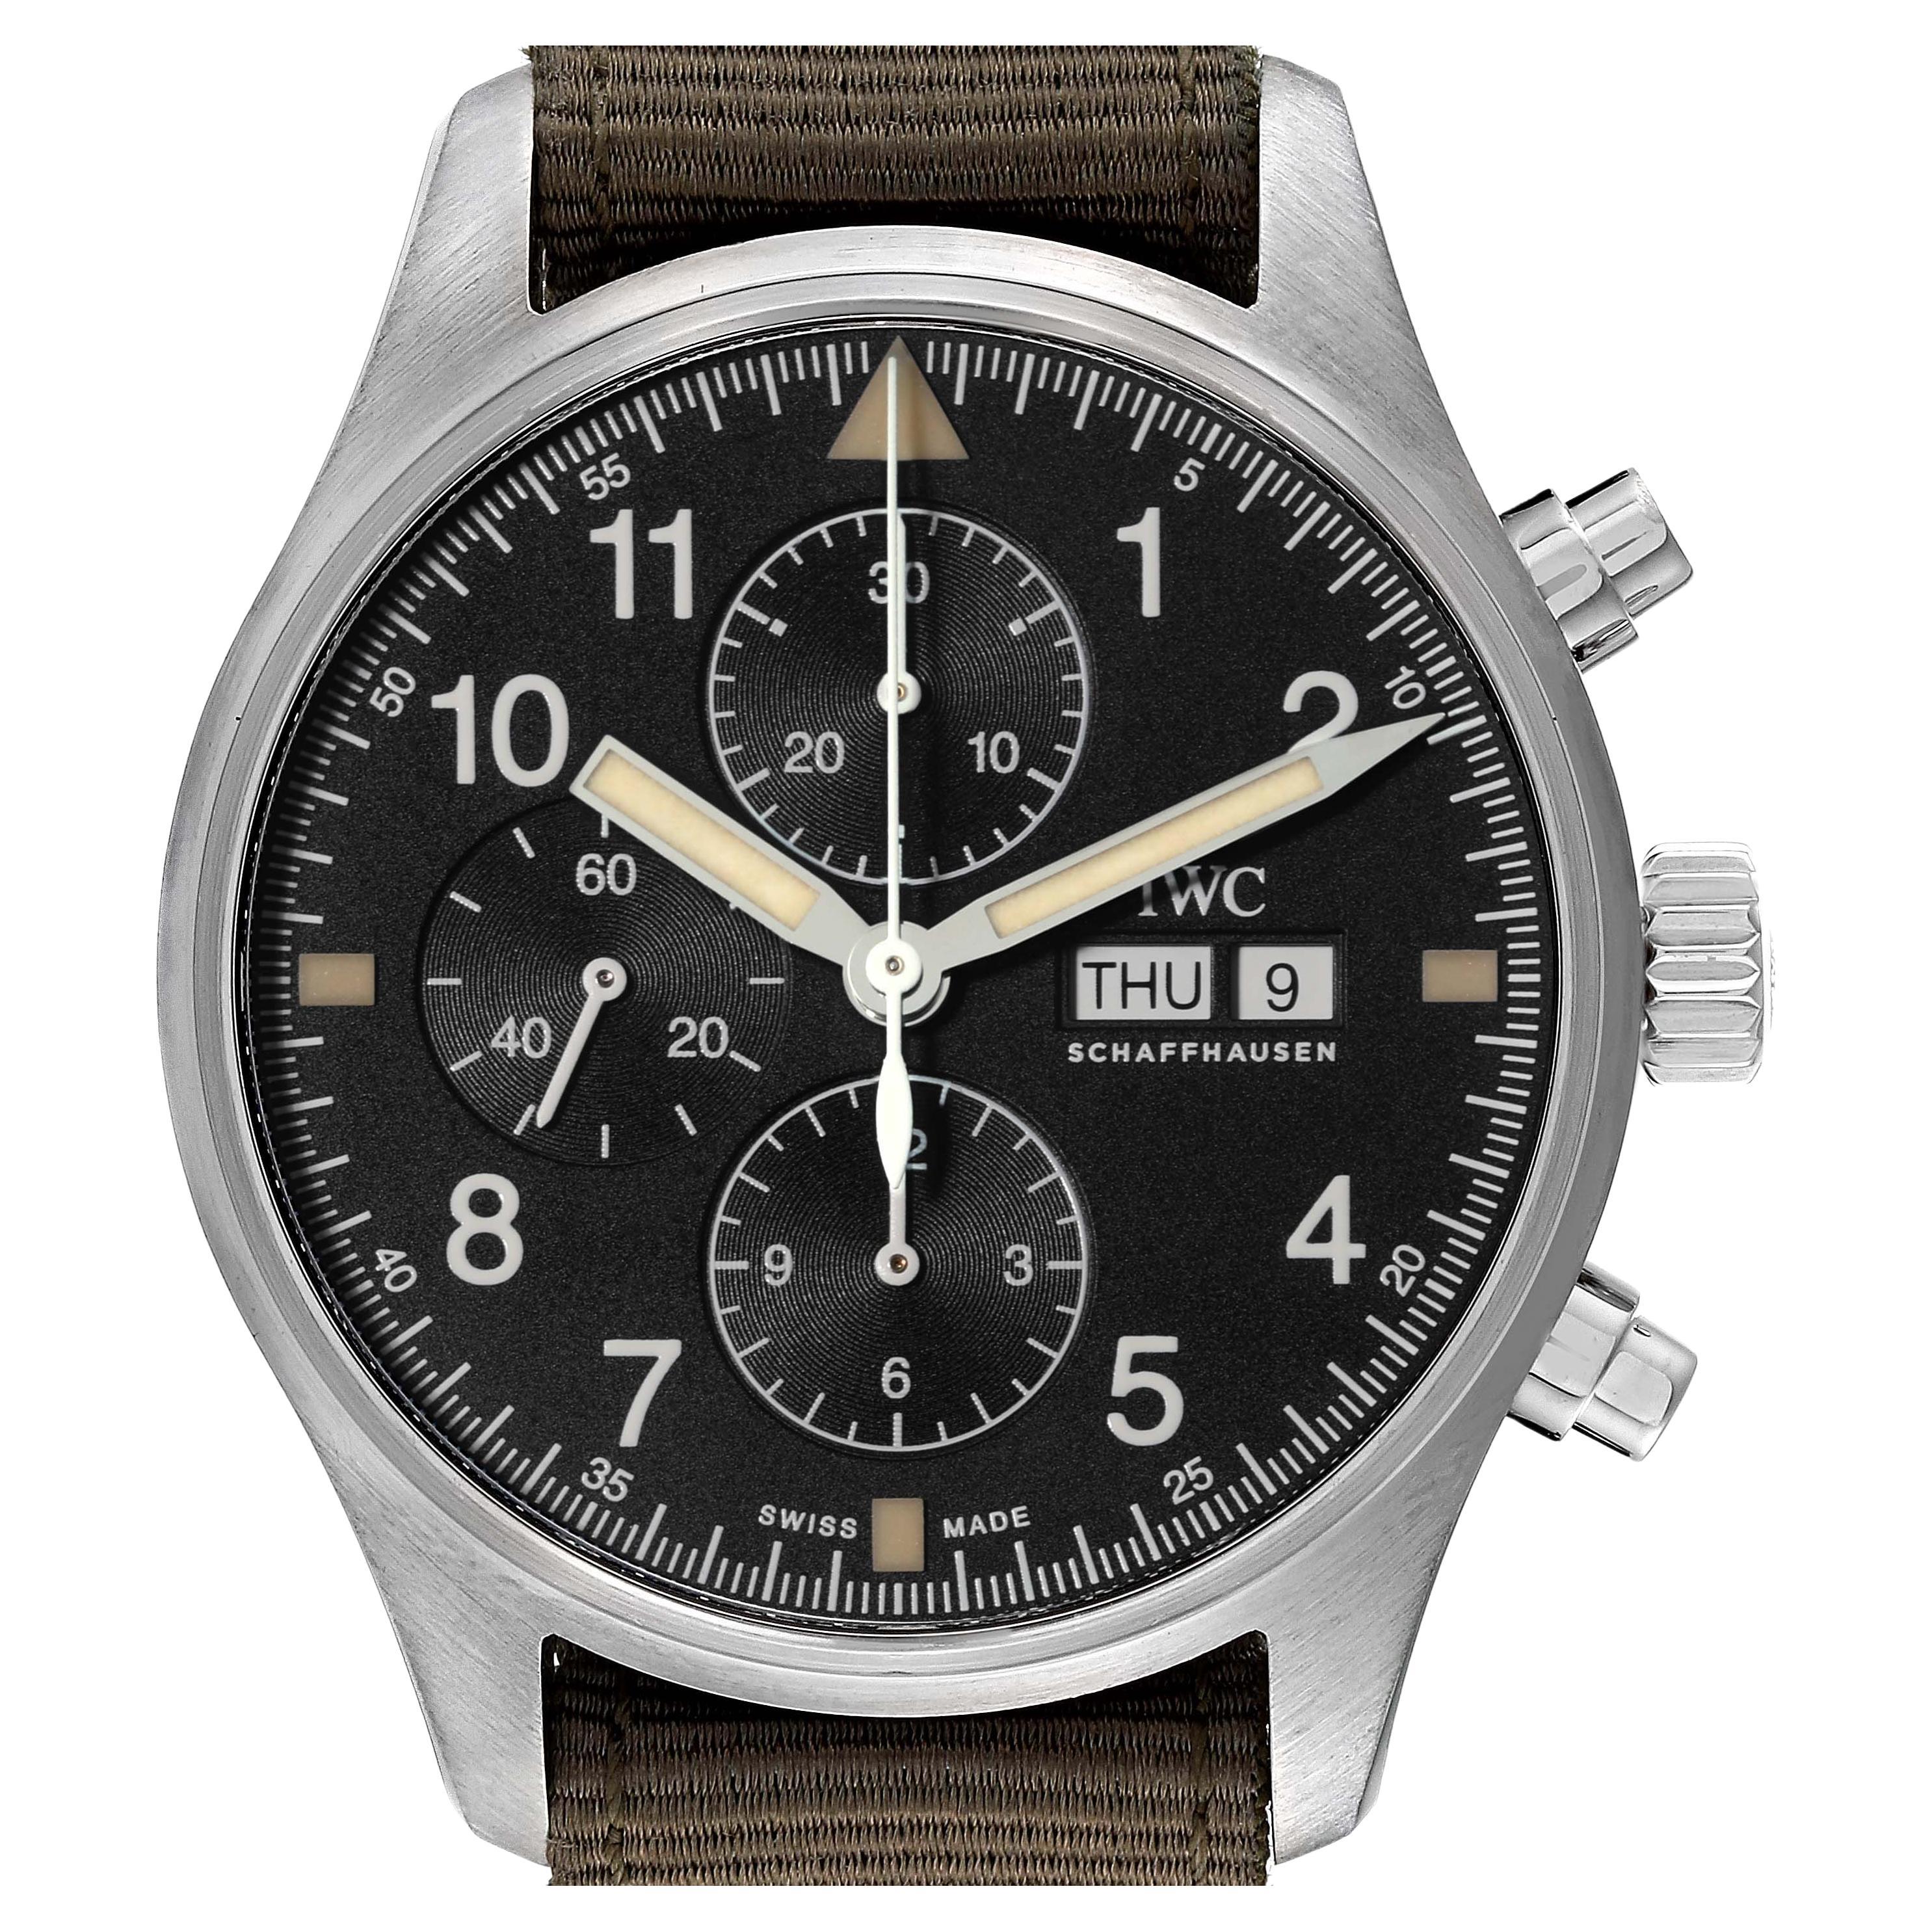 IWC Spitfire Pilot Steel Black Dial Chronograph Mens Watch IW377724 Box Card For Sale